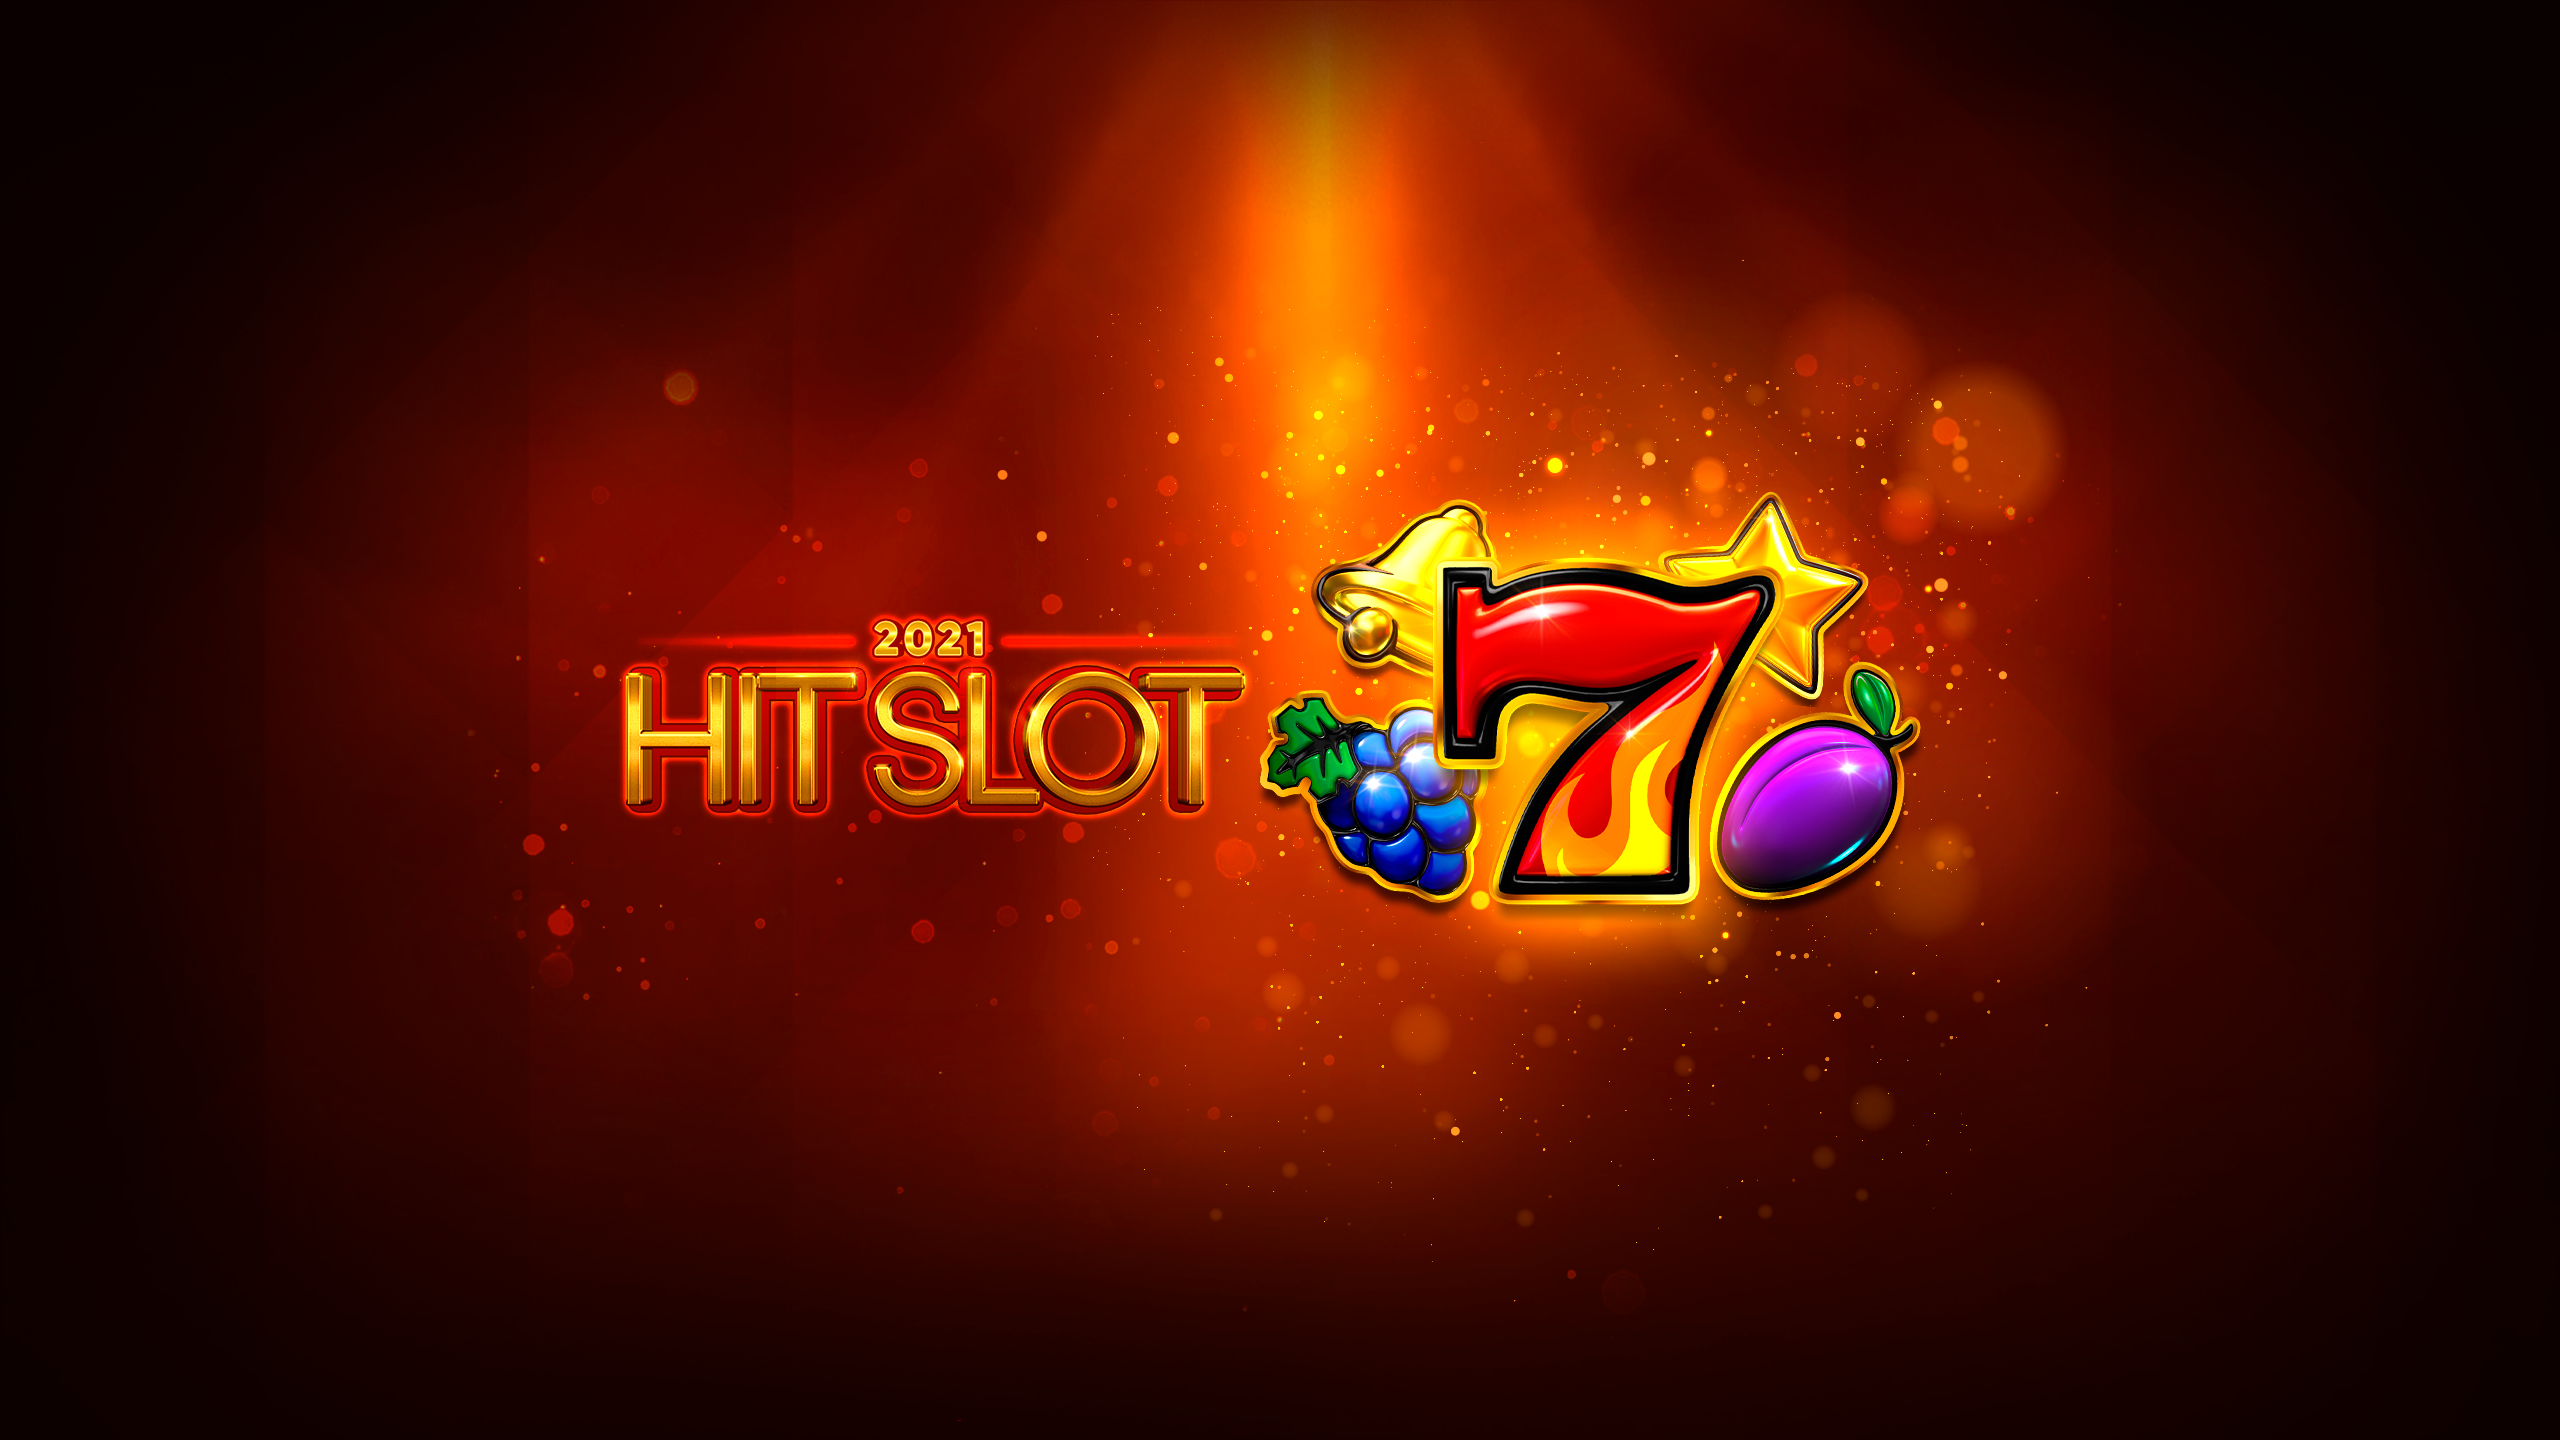 The 2021 Hit Slot Online Slot Demo Game by Endorphina